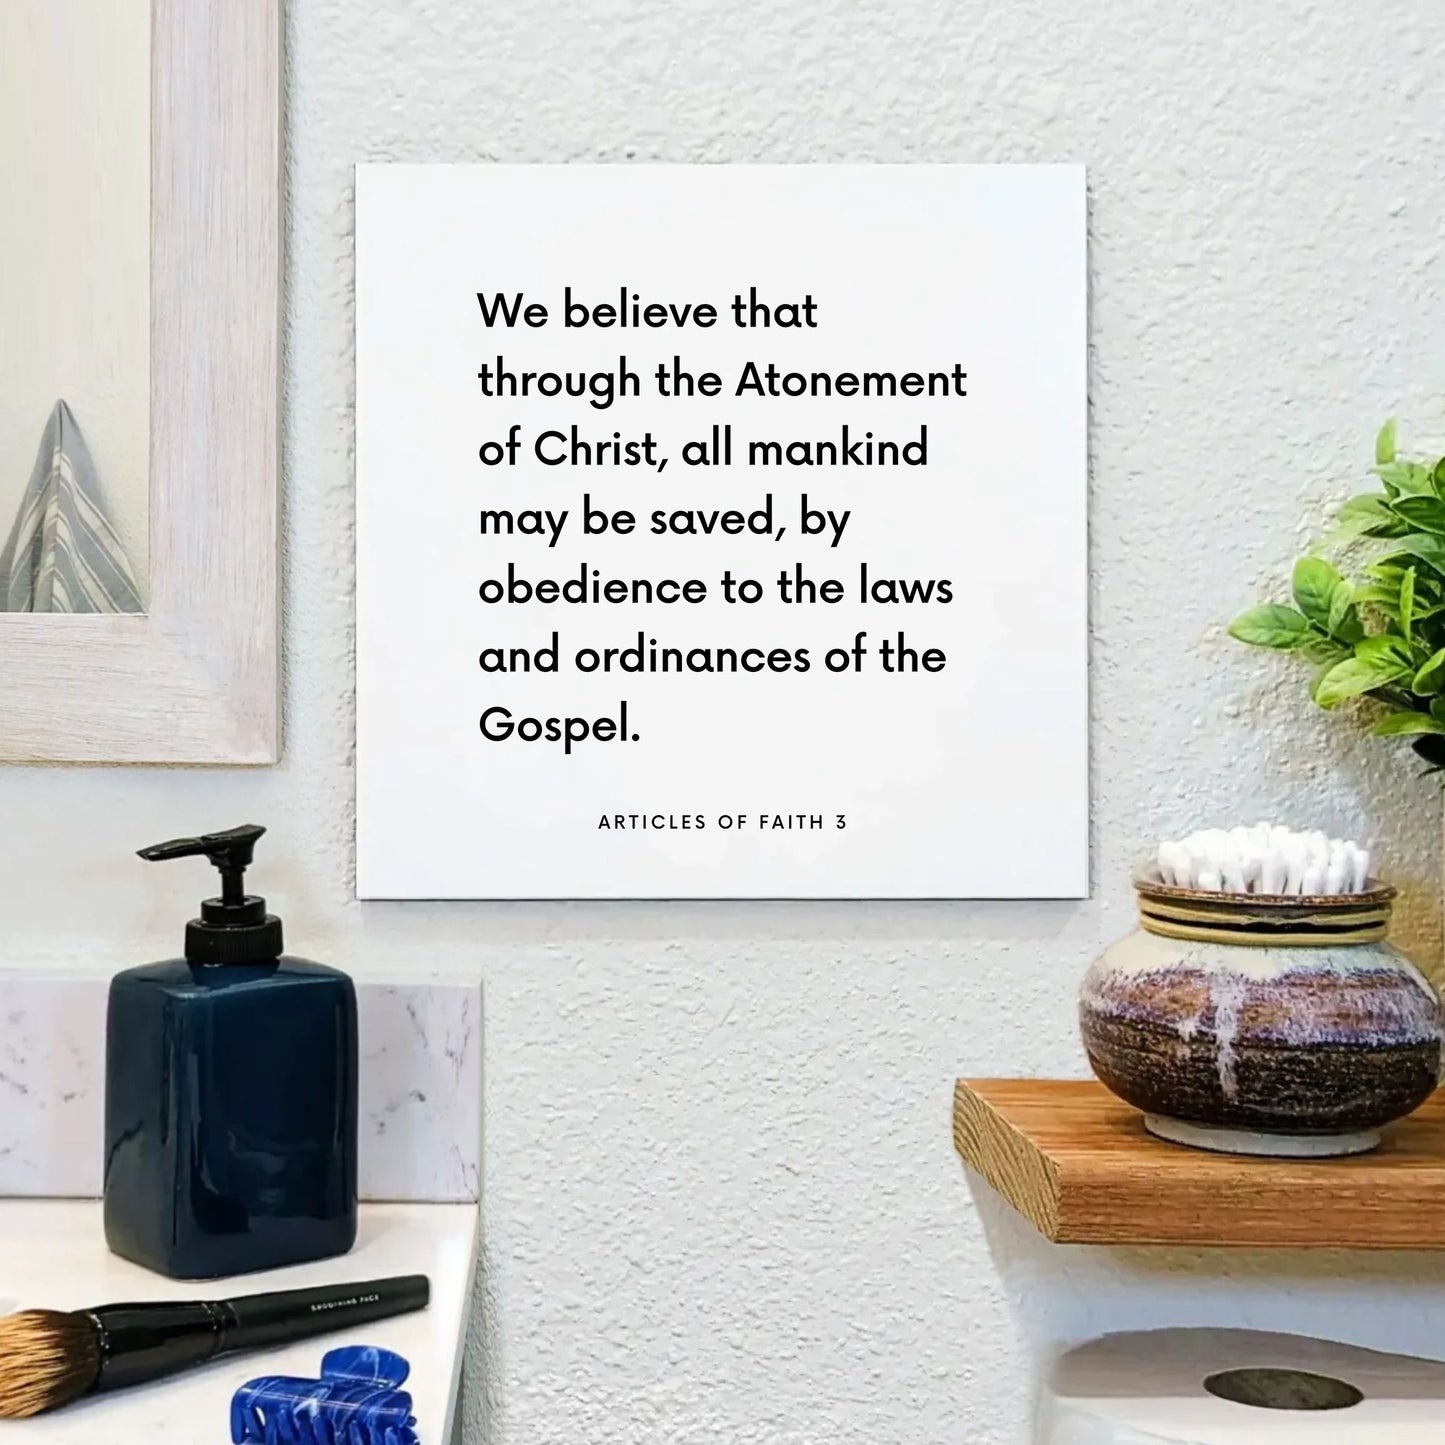 Bathroom mouting of the scripture tile for Articles of Faith 3 - "We believe that through the Atonement of Christ"